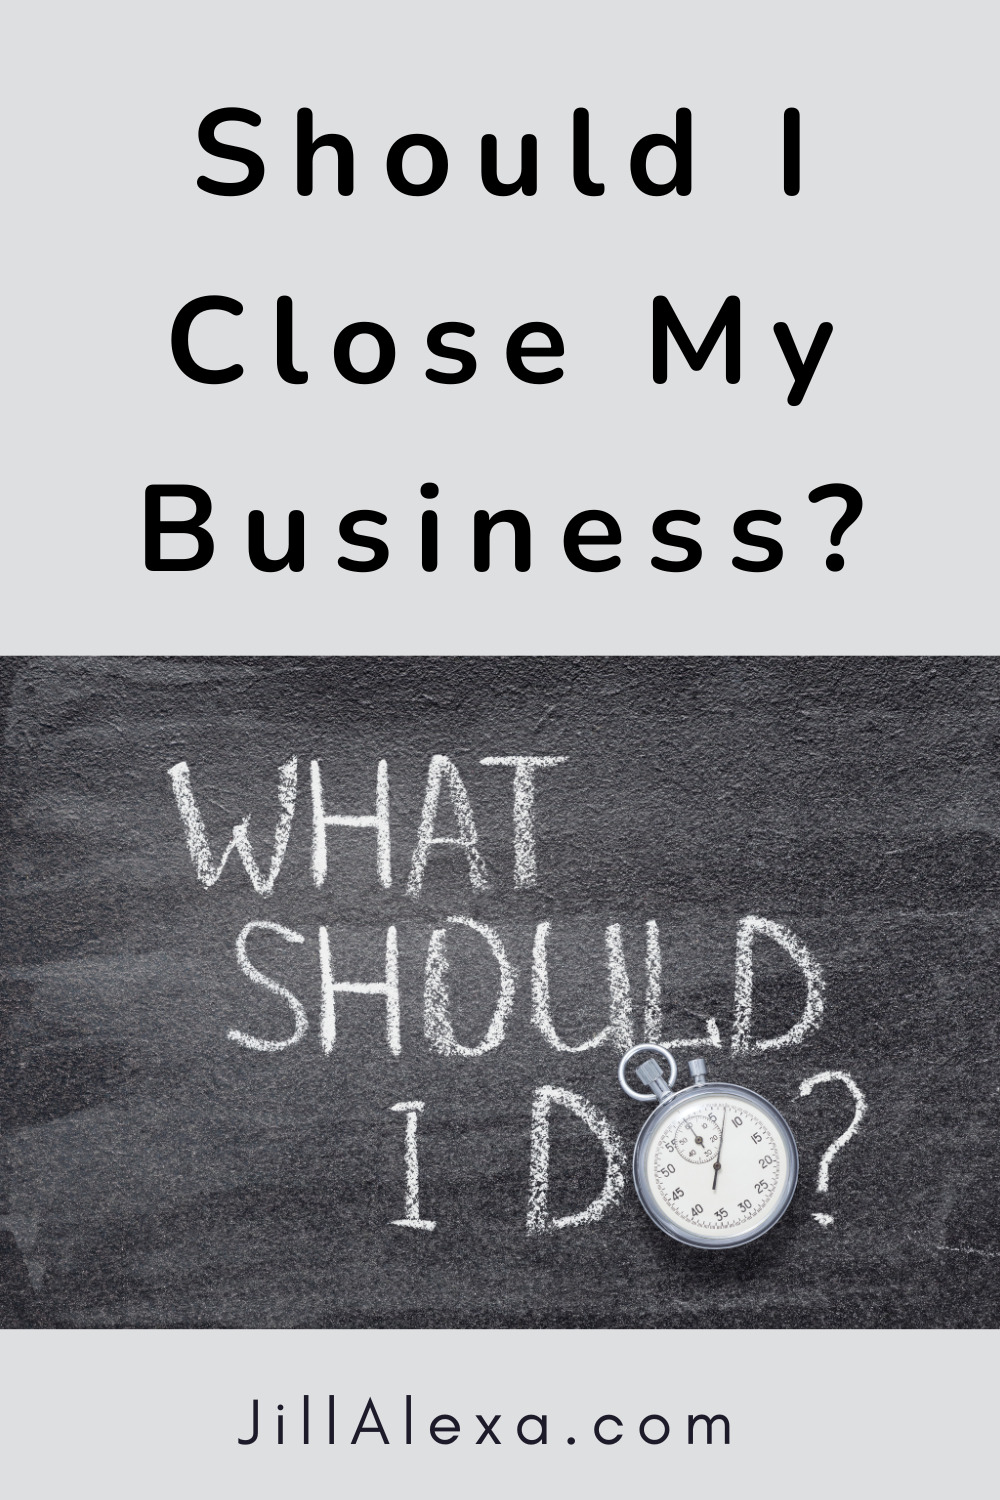 Should I close my business? 4 Ways to help you determine if you need to close the business for your well-being or if you simply need to take a step back.